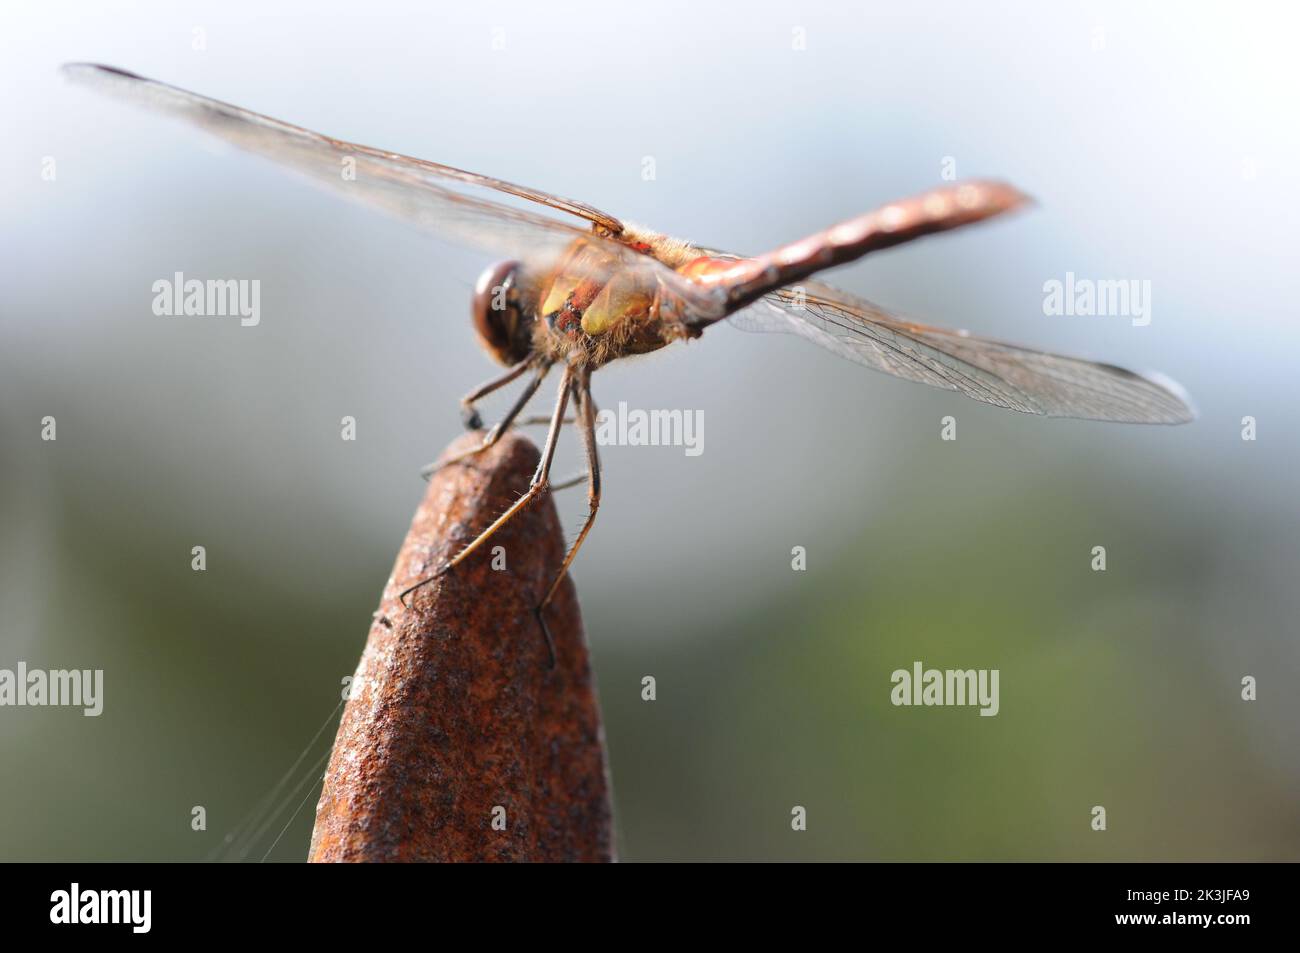 Macrophotography Dragonfly on a rusty obelisk. Detailed close up shot. Hovering on object in sun. Stock Photo